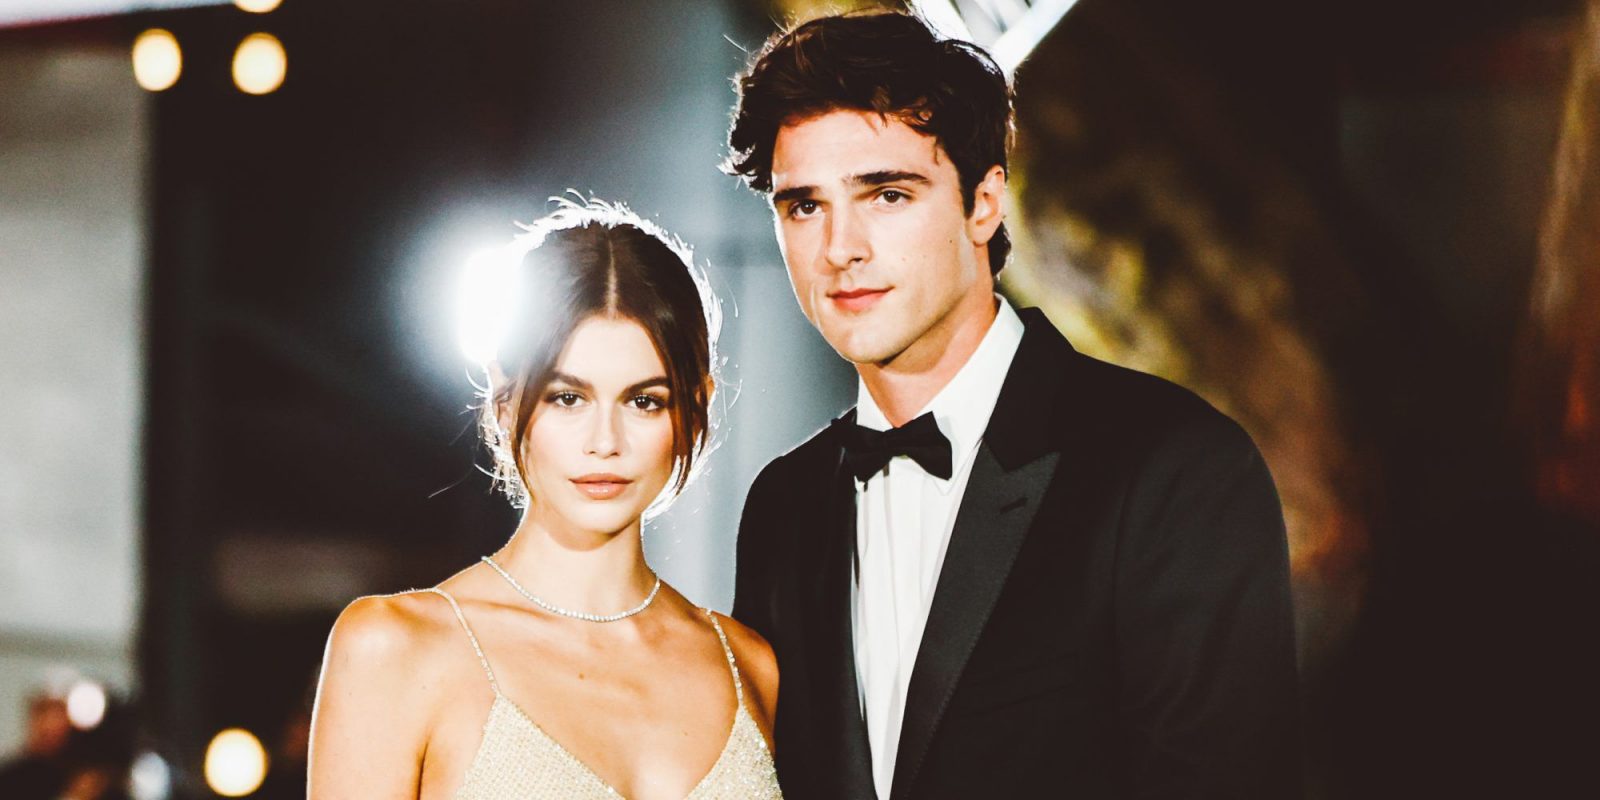 Jacob Elordi Biography, Height, Weight, Age, Movies, Wife, Family ...